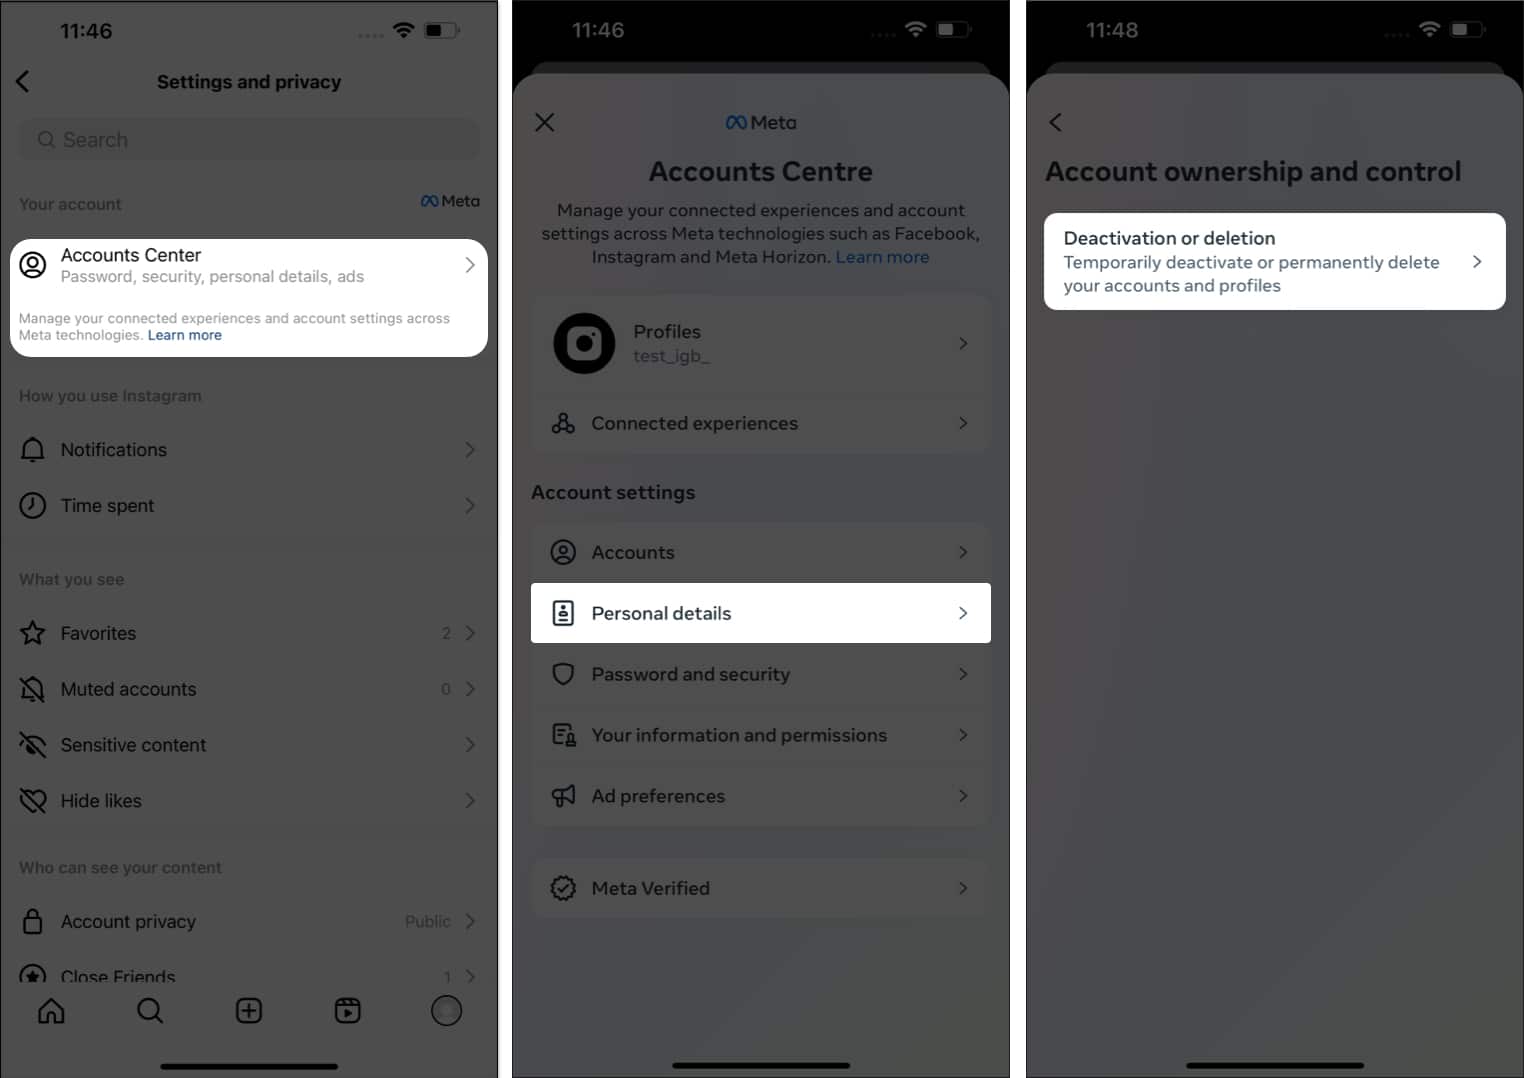 Access Account centre, personal details, deactivation or deletion in Instagram